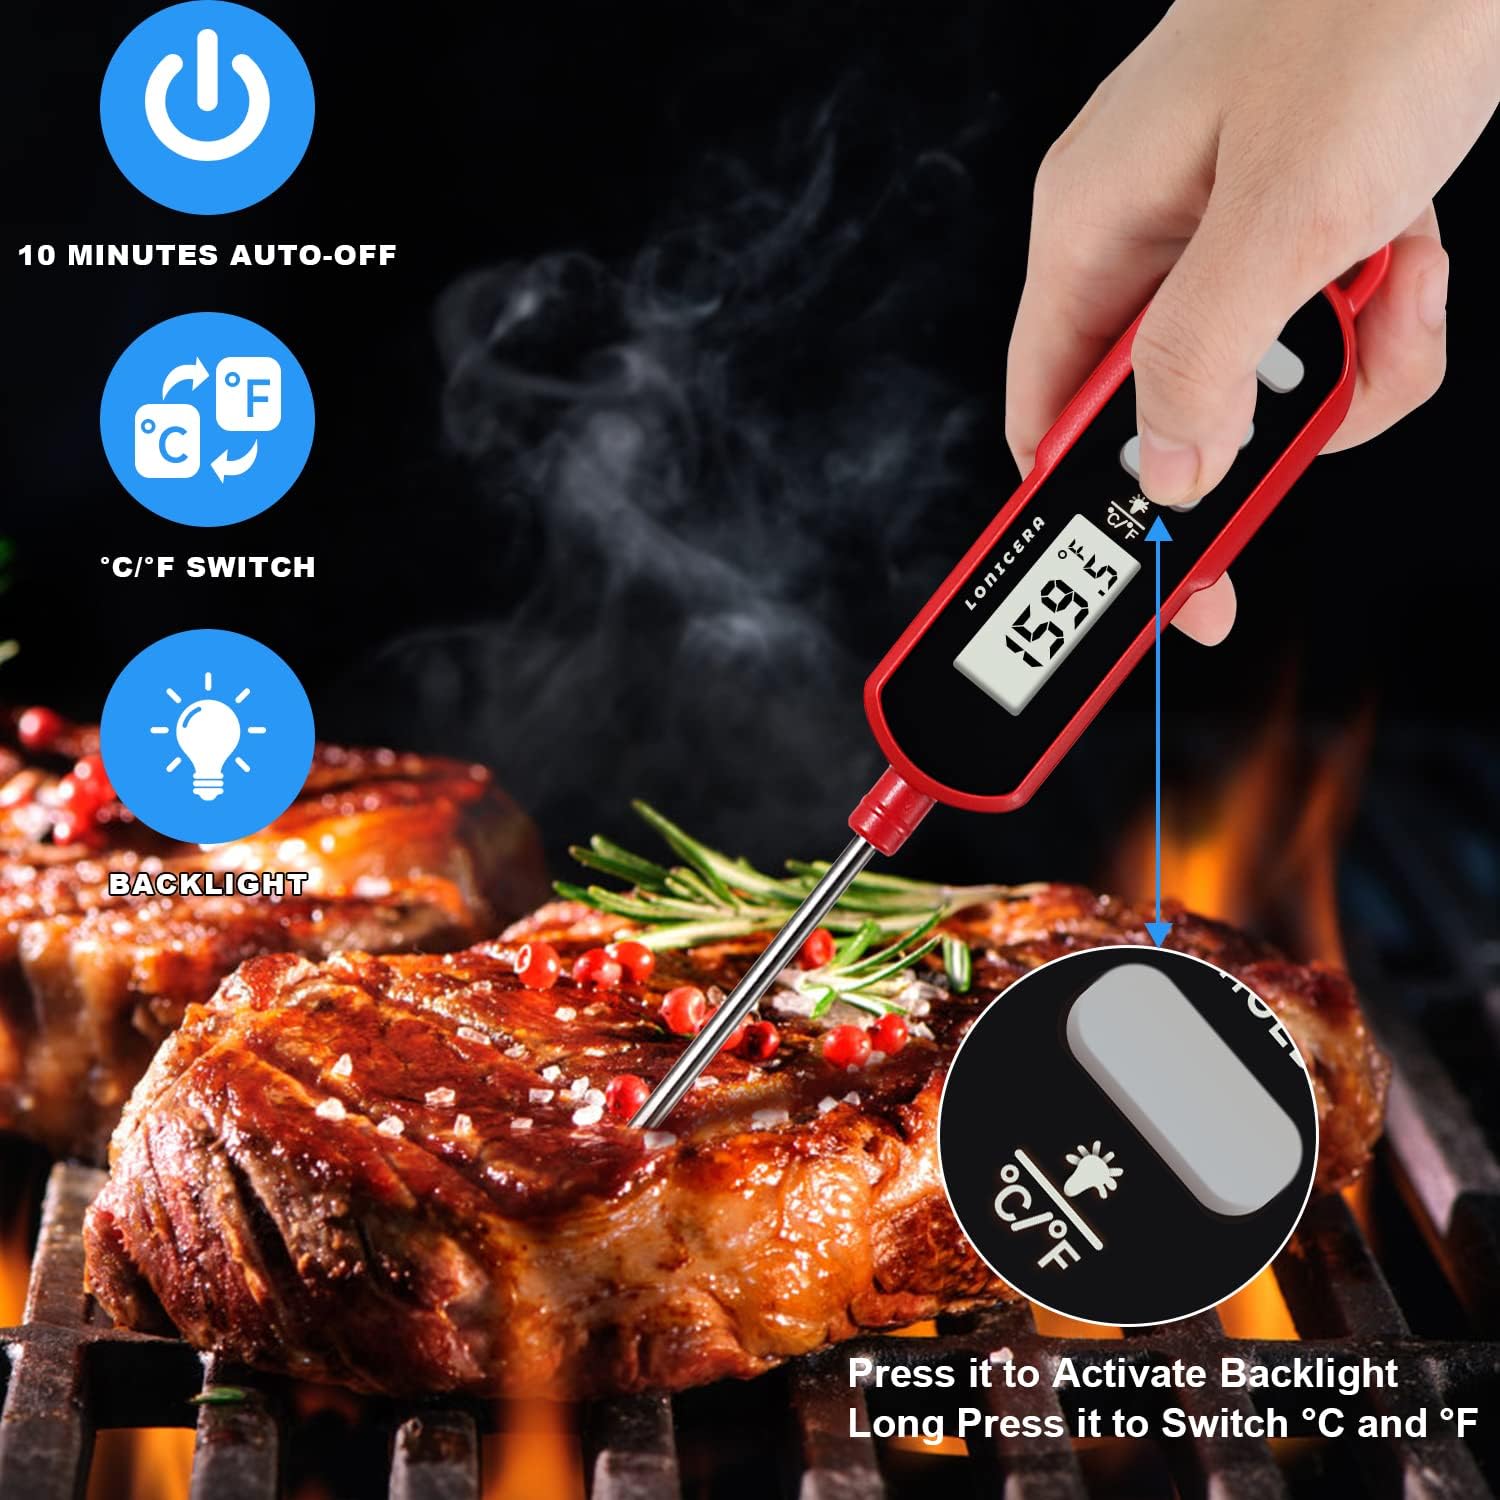 Lonicera Instant Read Digital Meat Thermometer for Food, Bread Baking, Water and Liquid. Waterproof and Long Probe with Meat Temp Guide for Cooking, Display with Backlit (Red)